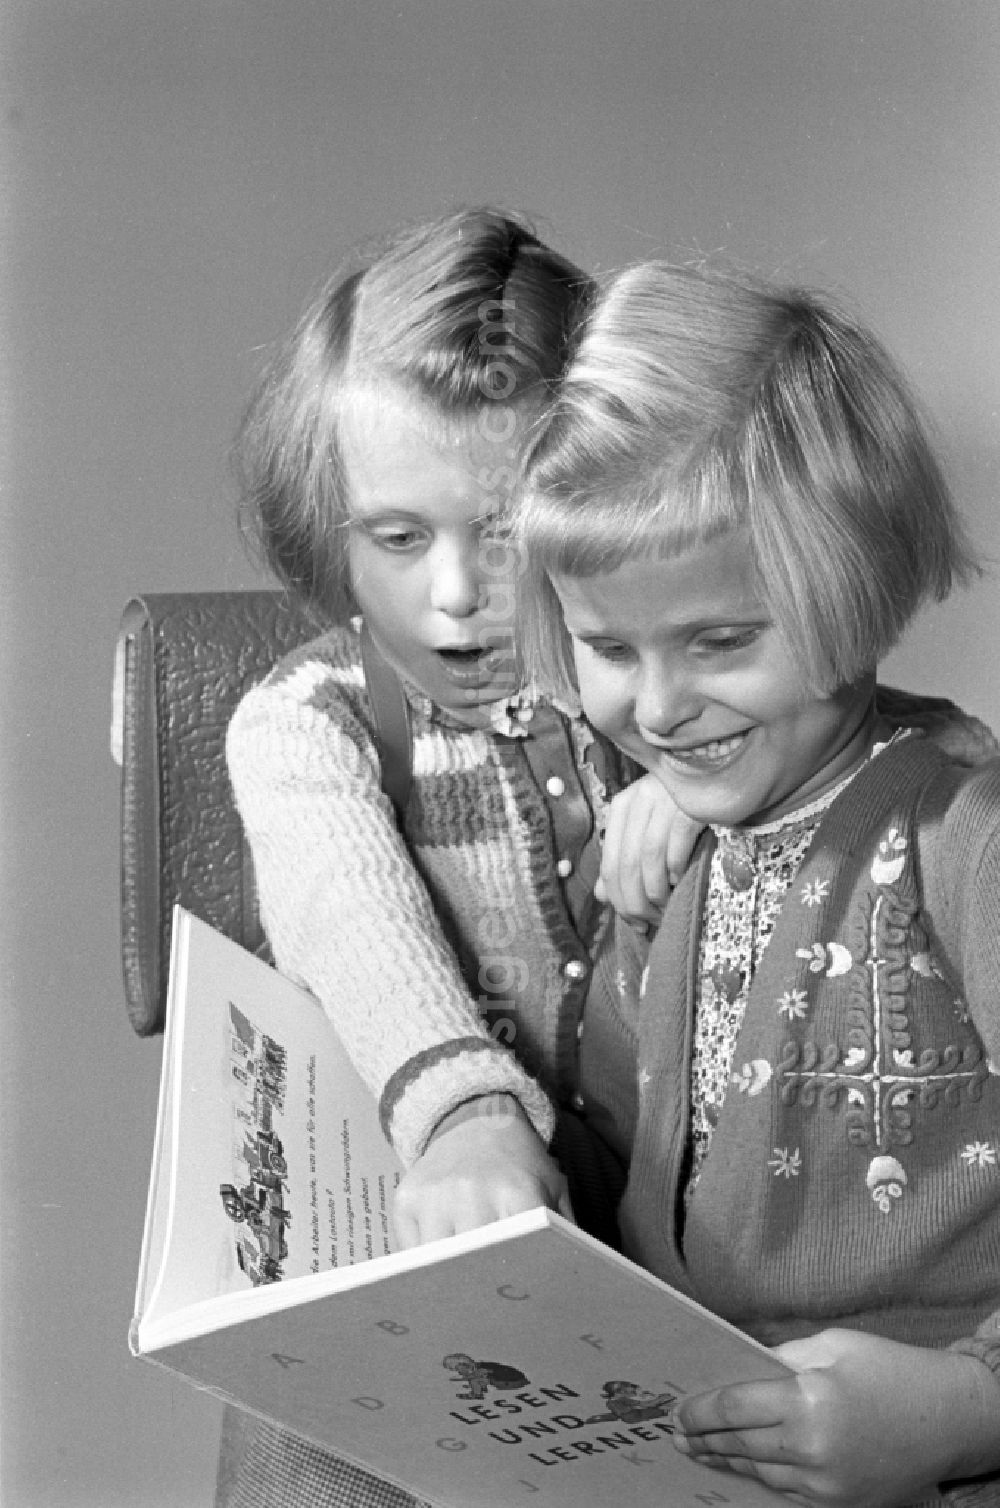 GDR image archive: Dresden - Children on the occasion of the start of school for two young girls enthusiastically looking at a school book on the German language Unsere Fiebel in the district of Altstadt in Dresden in the state of Saxony on the territory of the former GDR, German Democratic Republic